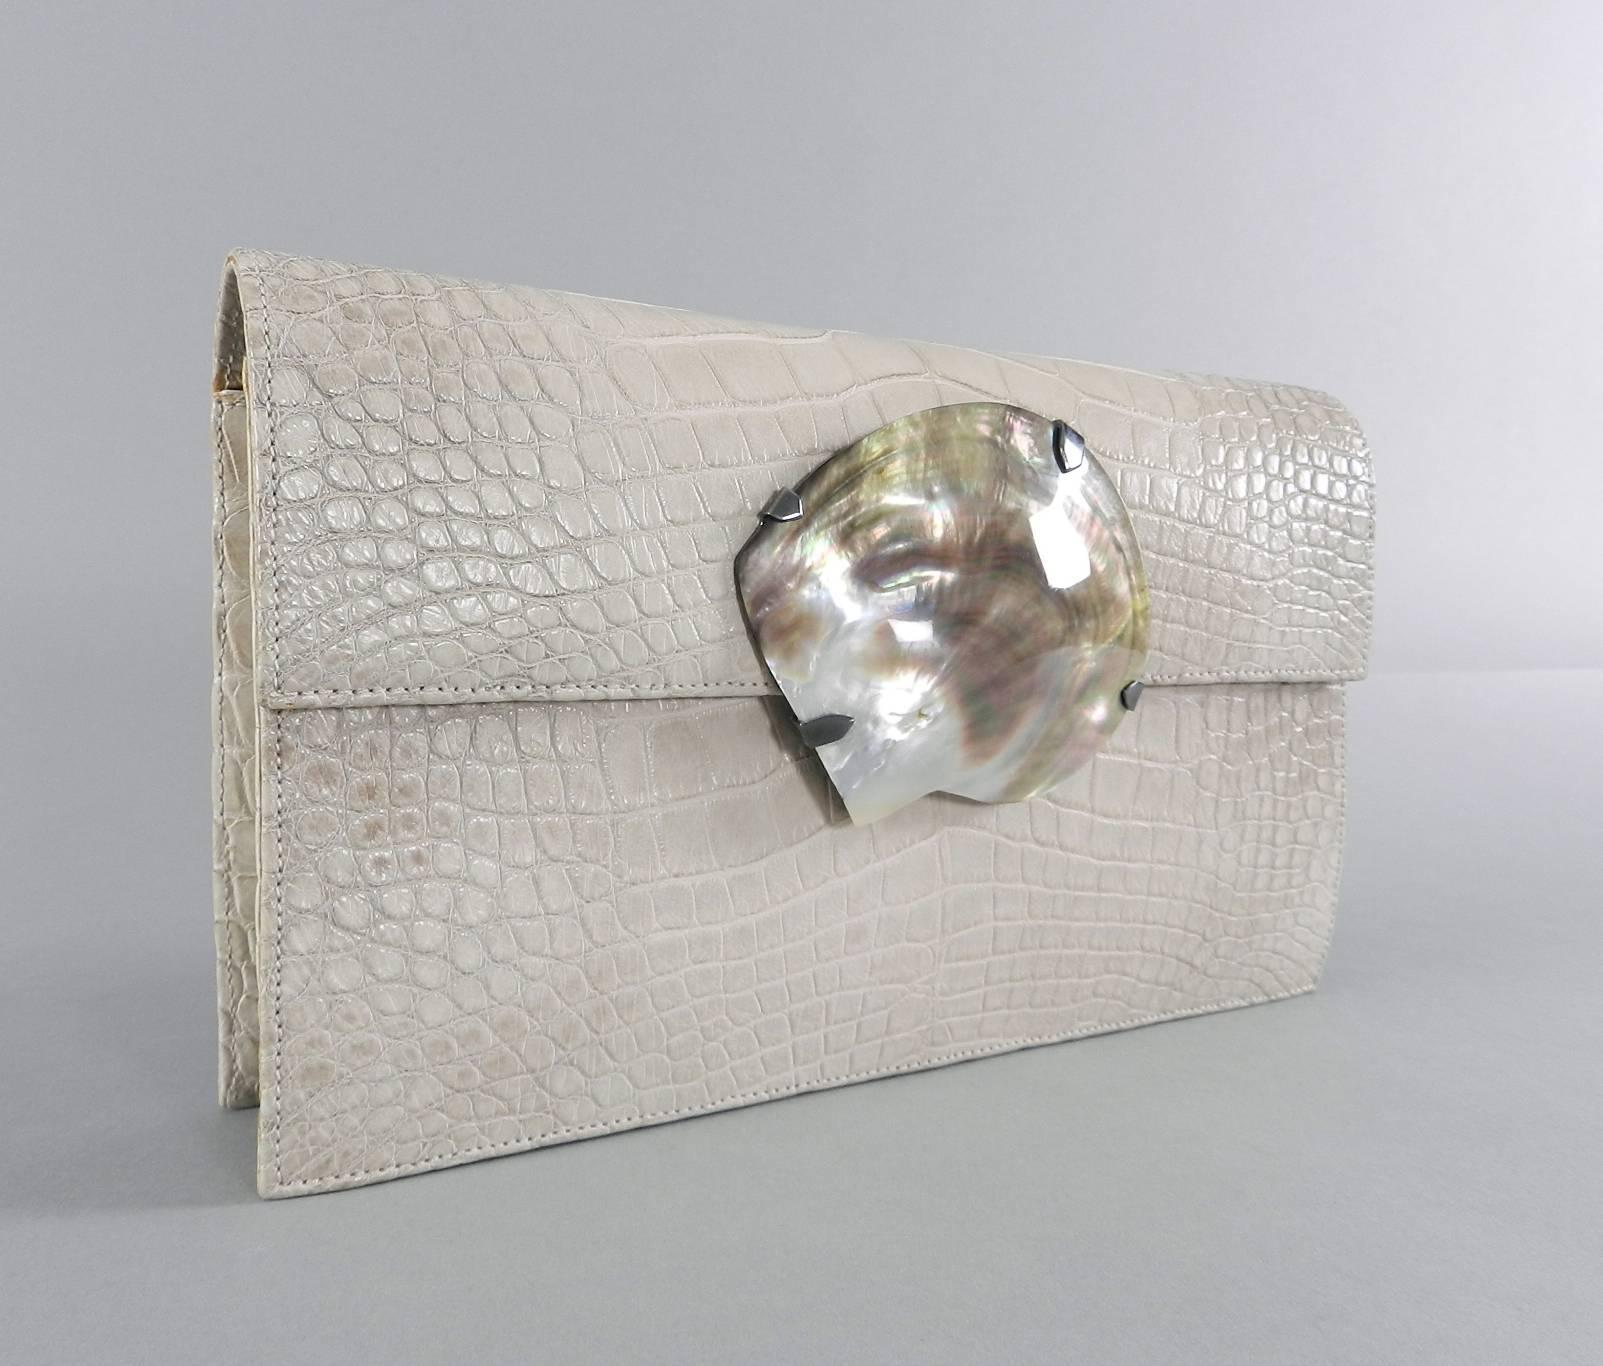 YSL Yves Saint Laurent Vintage Haute Couture Crocodile Clutch Bag with Abalone Shell.  Matte crocodile skin.  Color is a chalky light greyish beige / mushroom. Magnetic clasp closure, small zippered interior compartment, haute couture marked